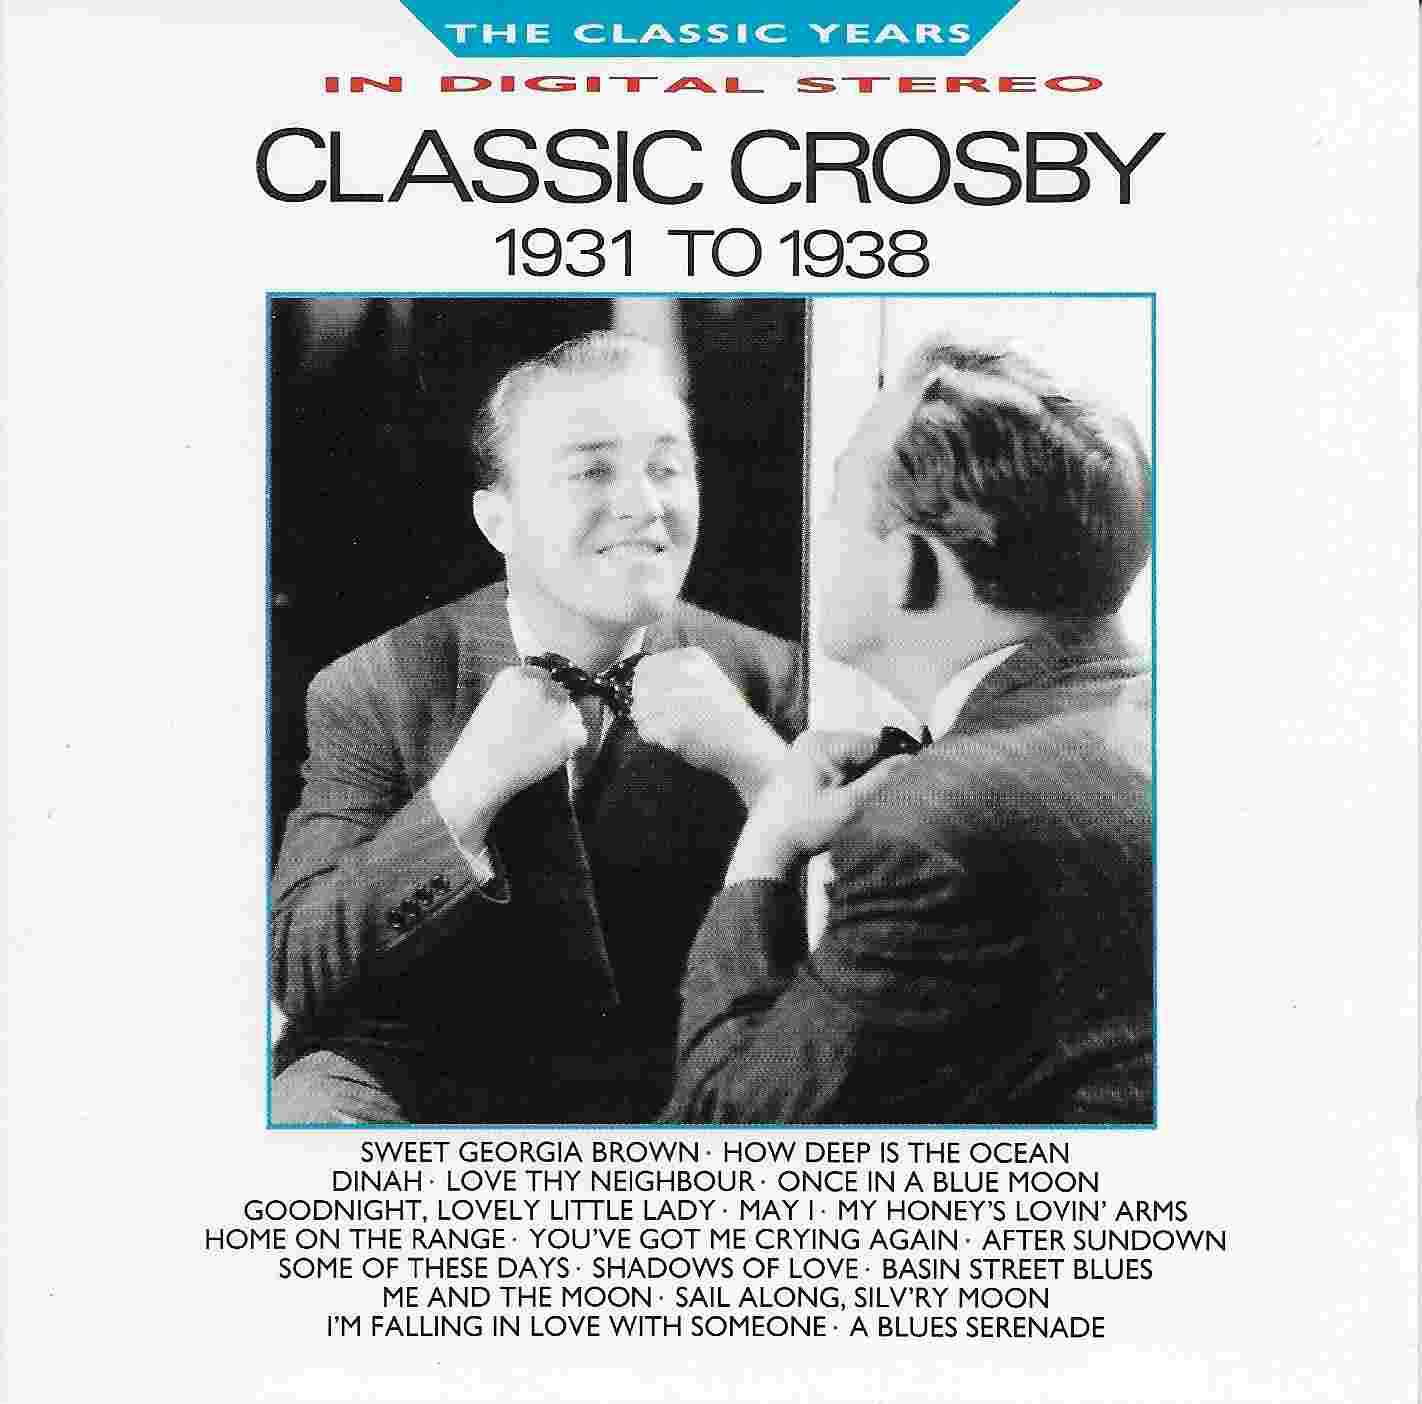 Picture of Classic years - Classic Crosby 1931 - 1938 by artist Bing Crosby  from the BBC cds - Records and Tapes library